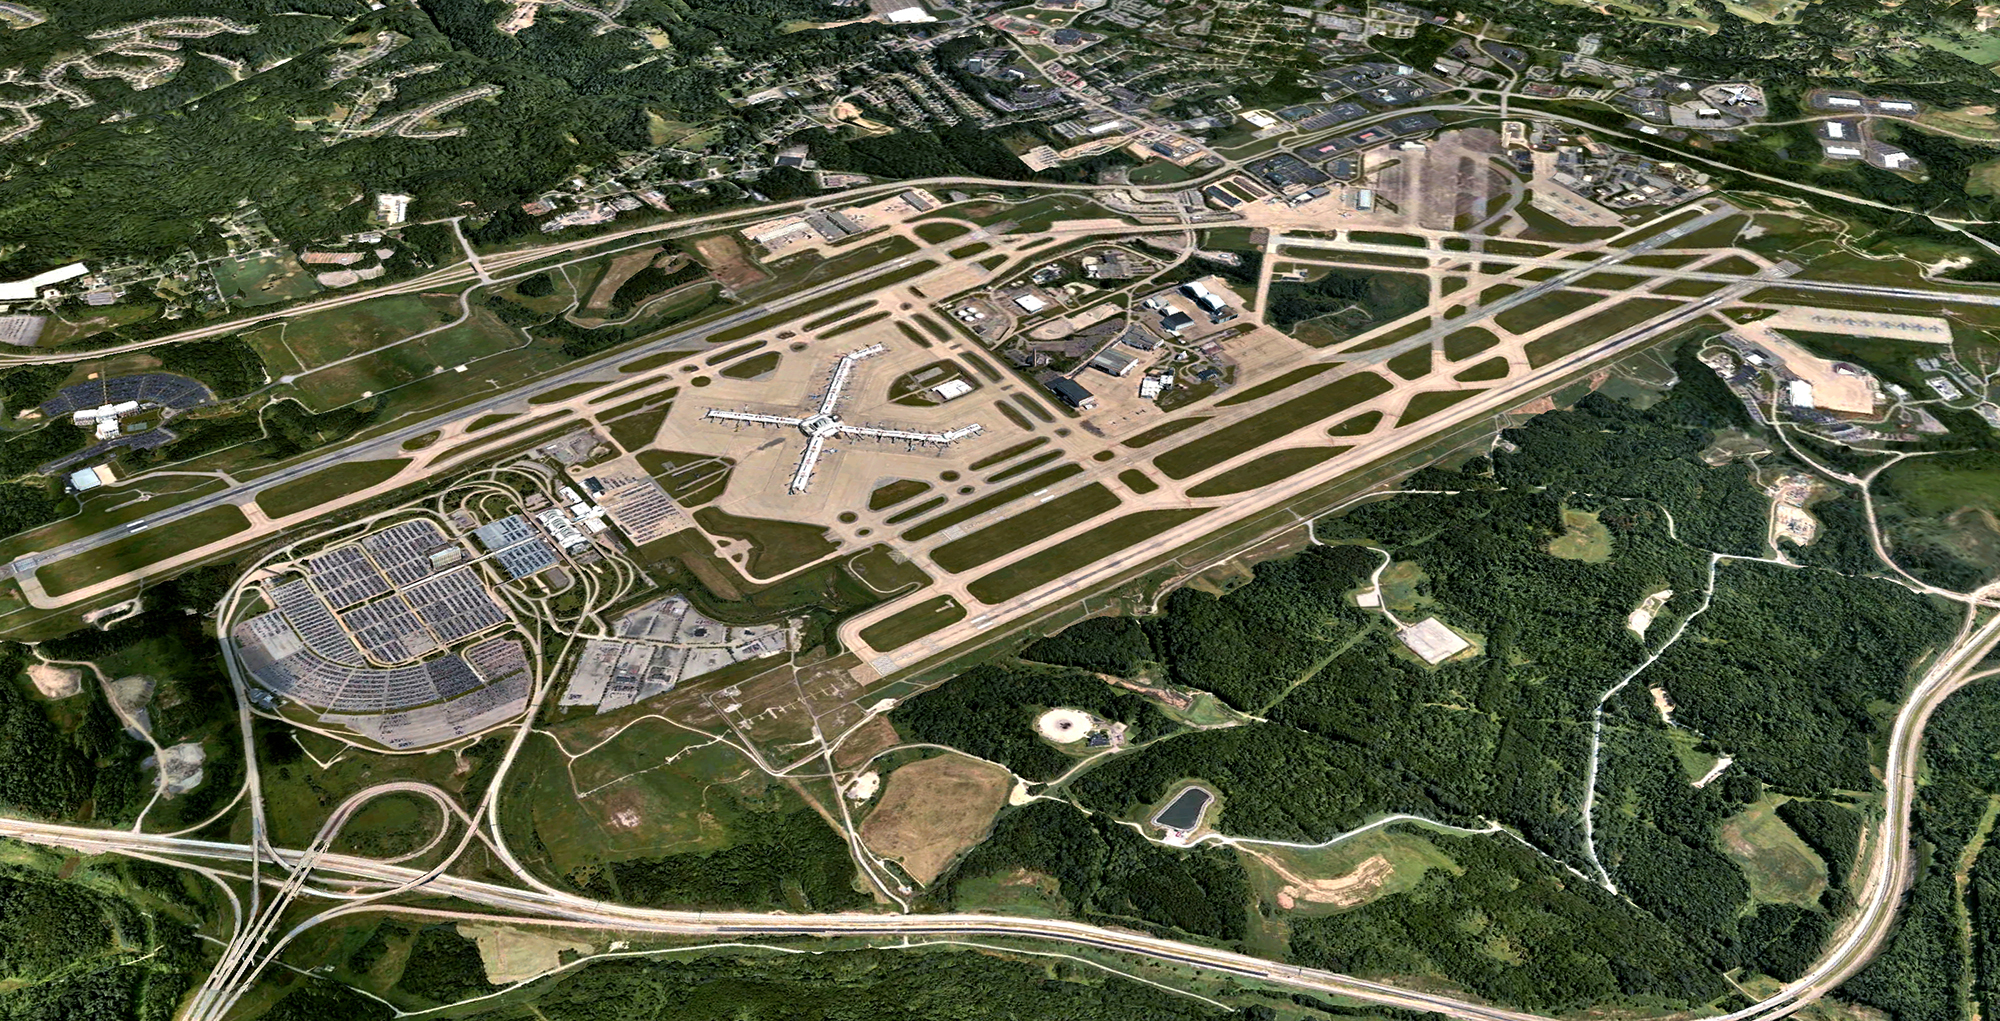 Pittsburgh International Airport, completely powered by natural gas and solar energy